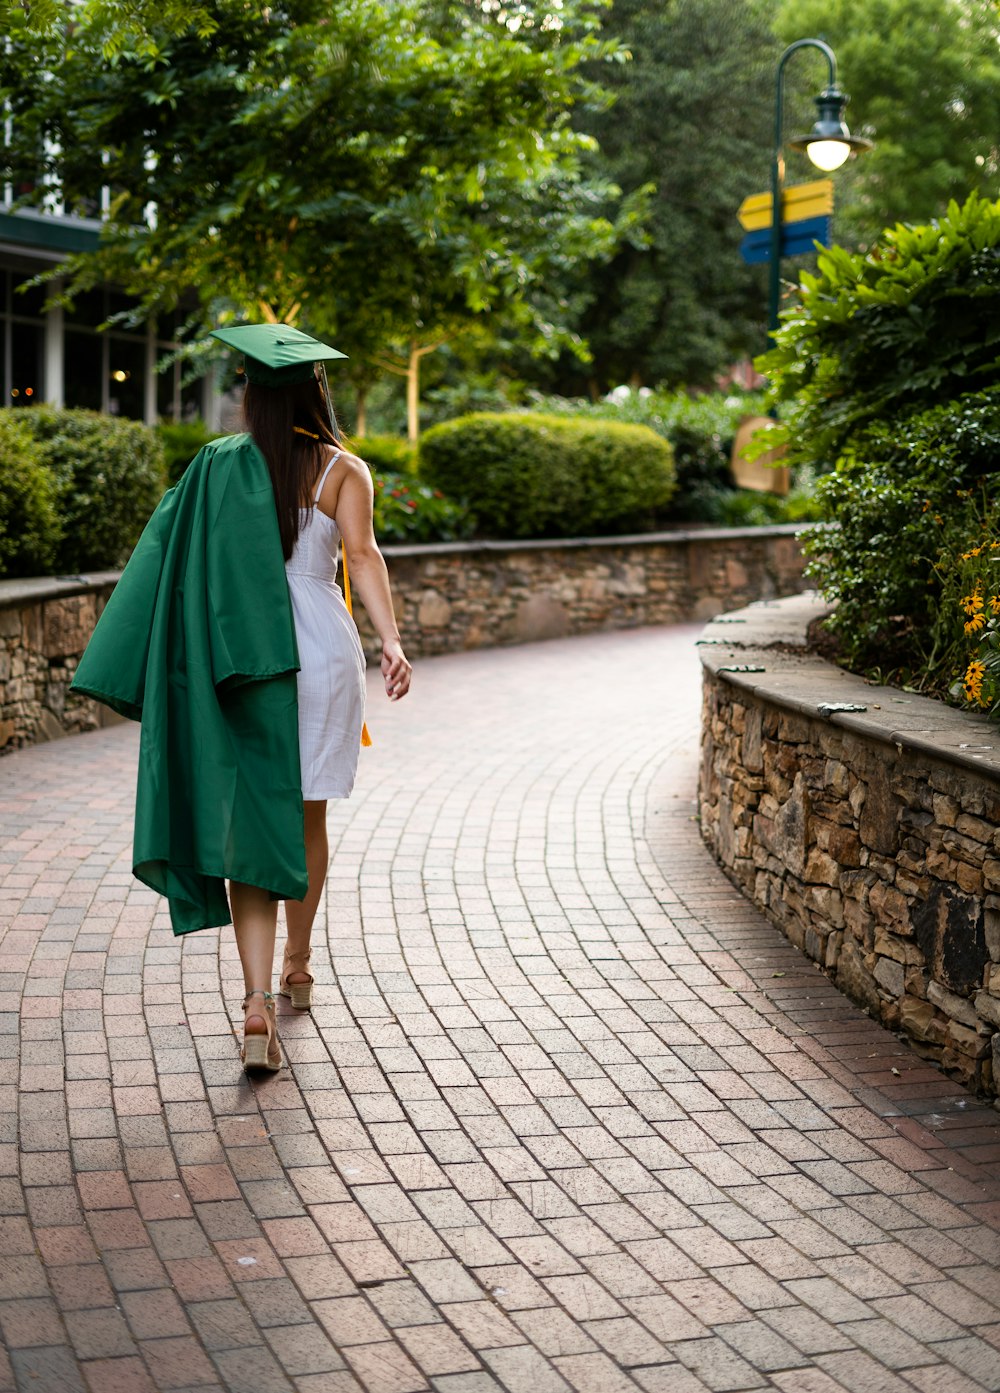 unknown person wearing academic dress walking outdoors